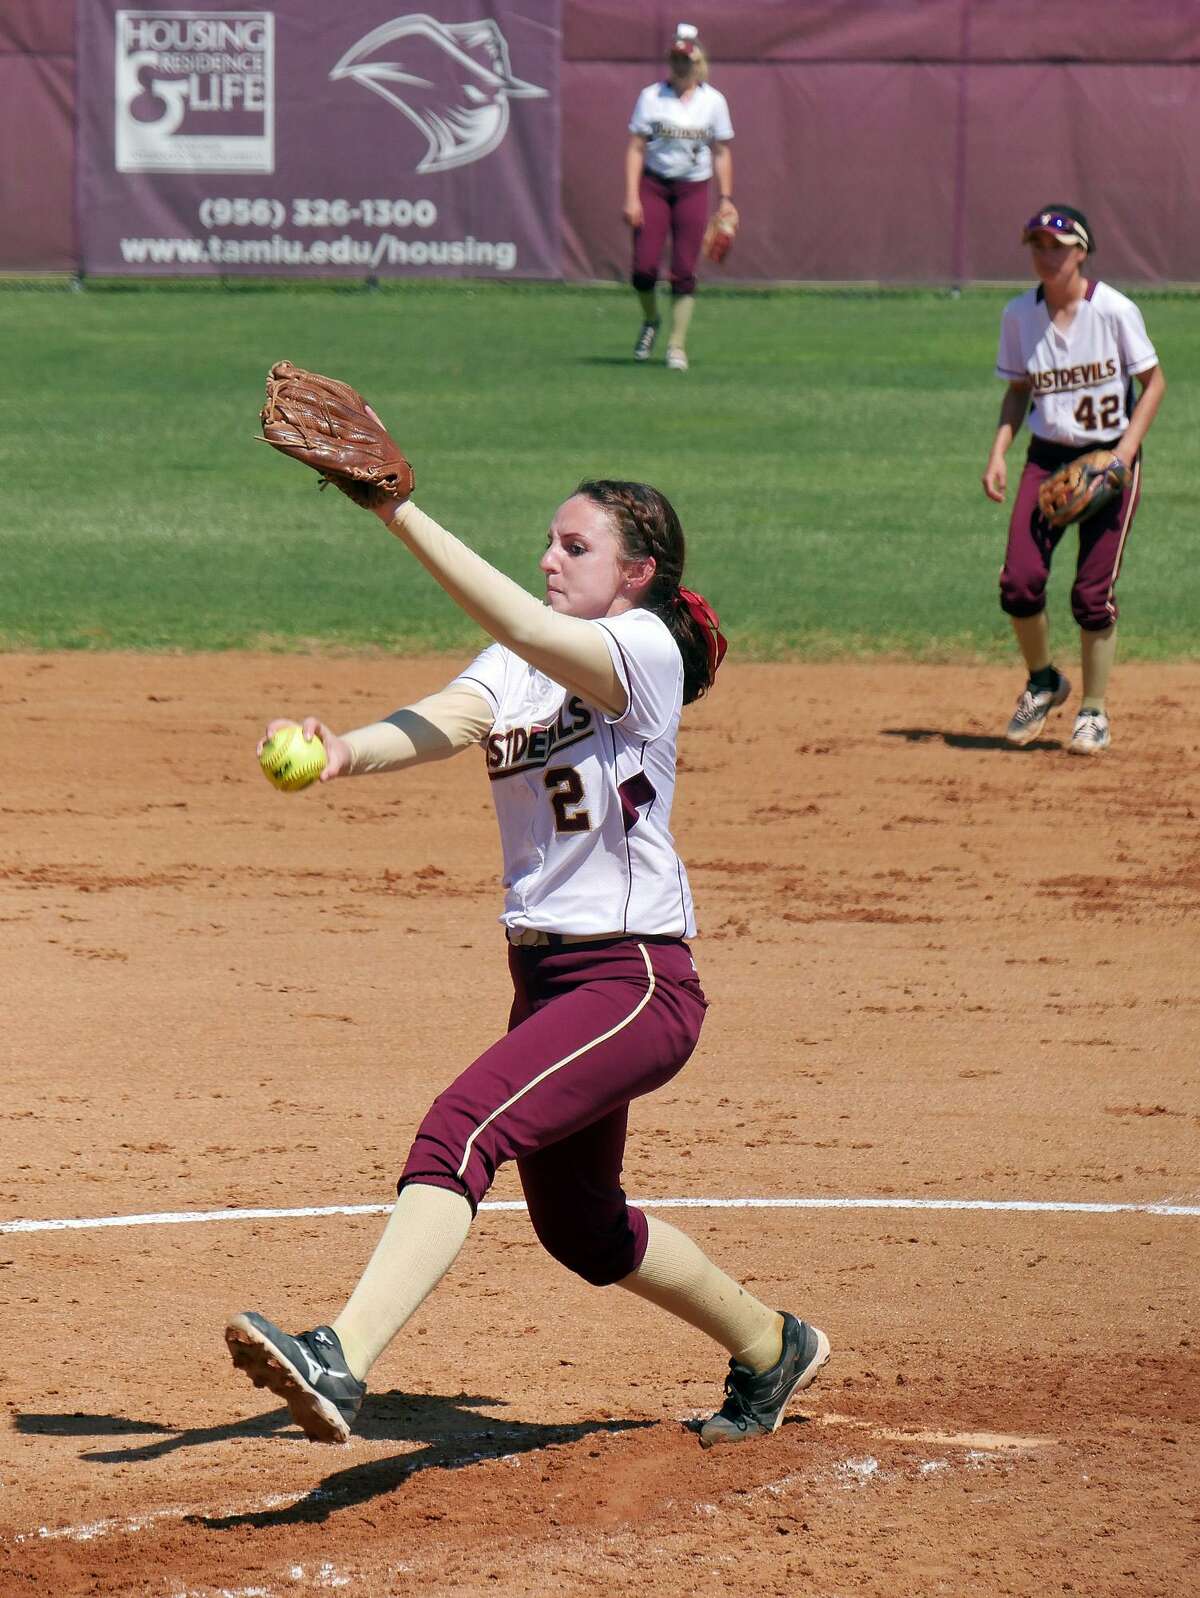 TAMIU pitcher Delainy Thompson threw five innings giving up six runs (five earned) on four hits with four walks and two strikeouts in a loss to Rogers State to begin the Heartland Conference tournament.